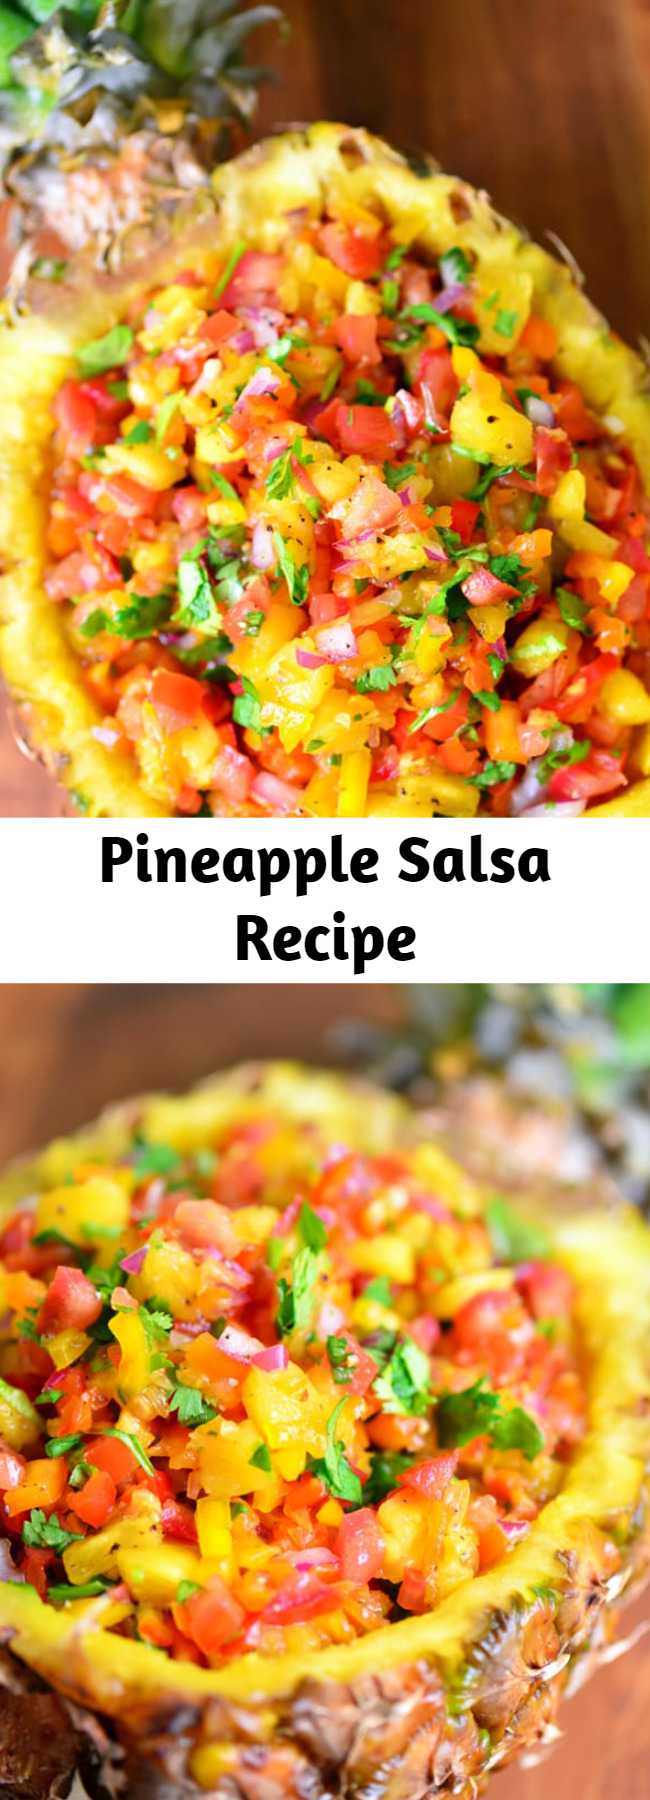 Pineapple Salsa Recipe - This pineapple salsa recipe has a delicious combination of sweet and spicy. It can be served with grilled chicken or fish or as an appetizer with chips.